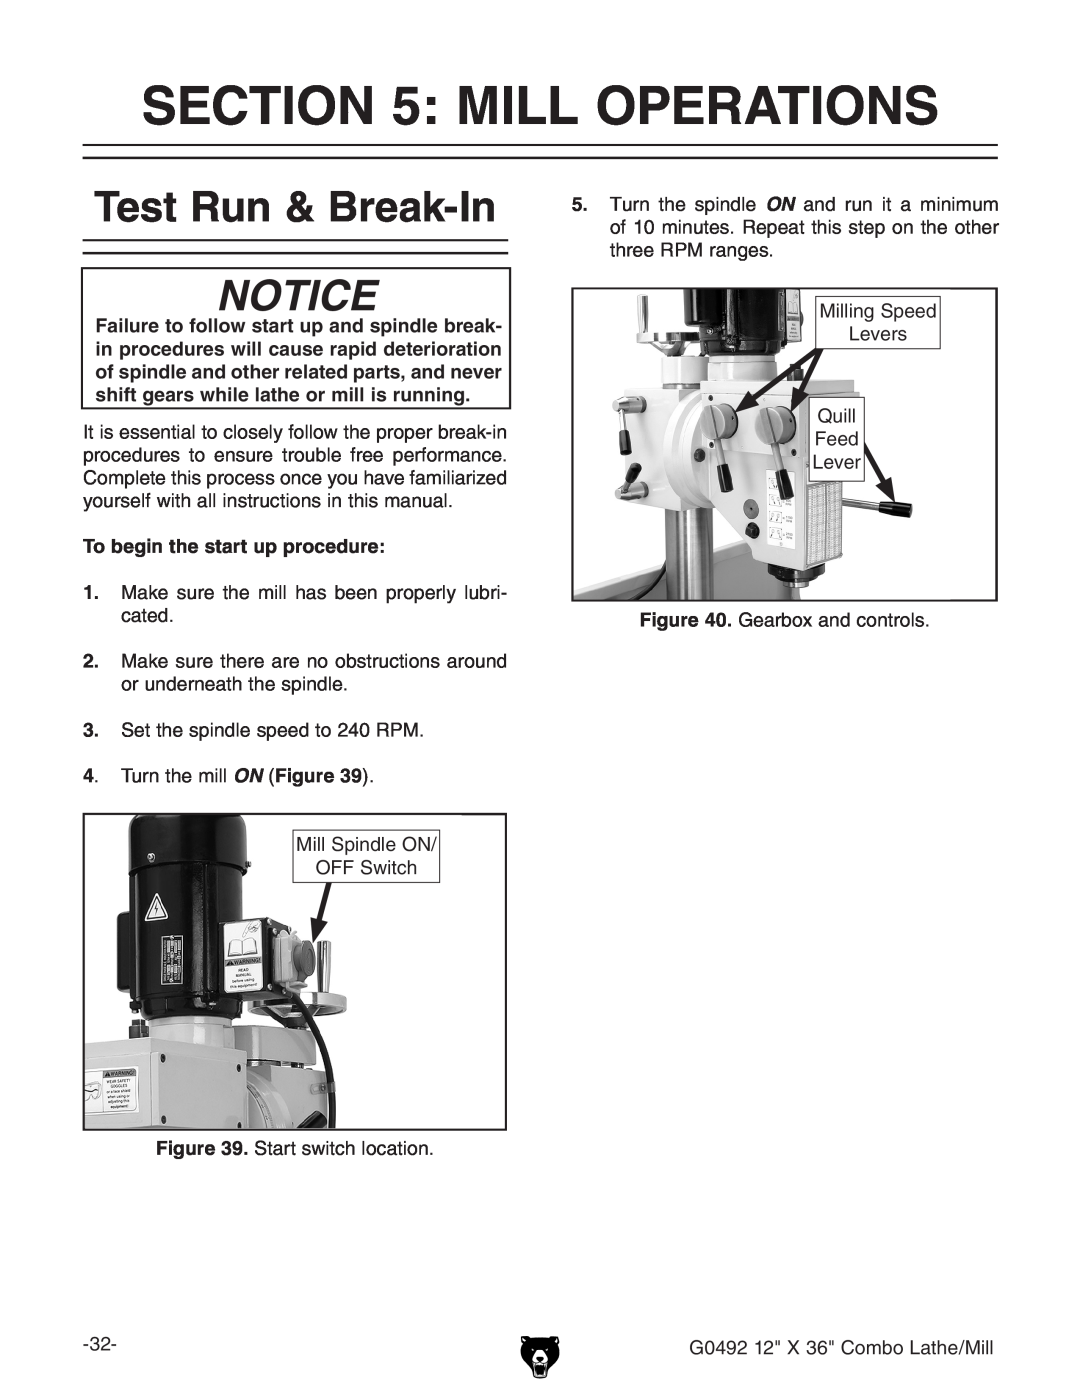 Grizzly G0492 owner manual Mill Operations, To begin the start up procedure, Test Run & Break-In 